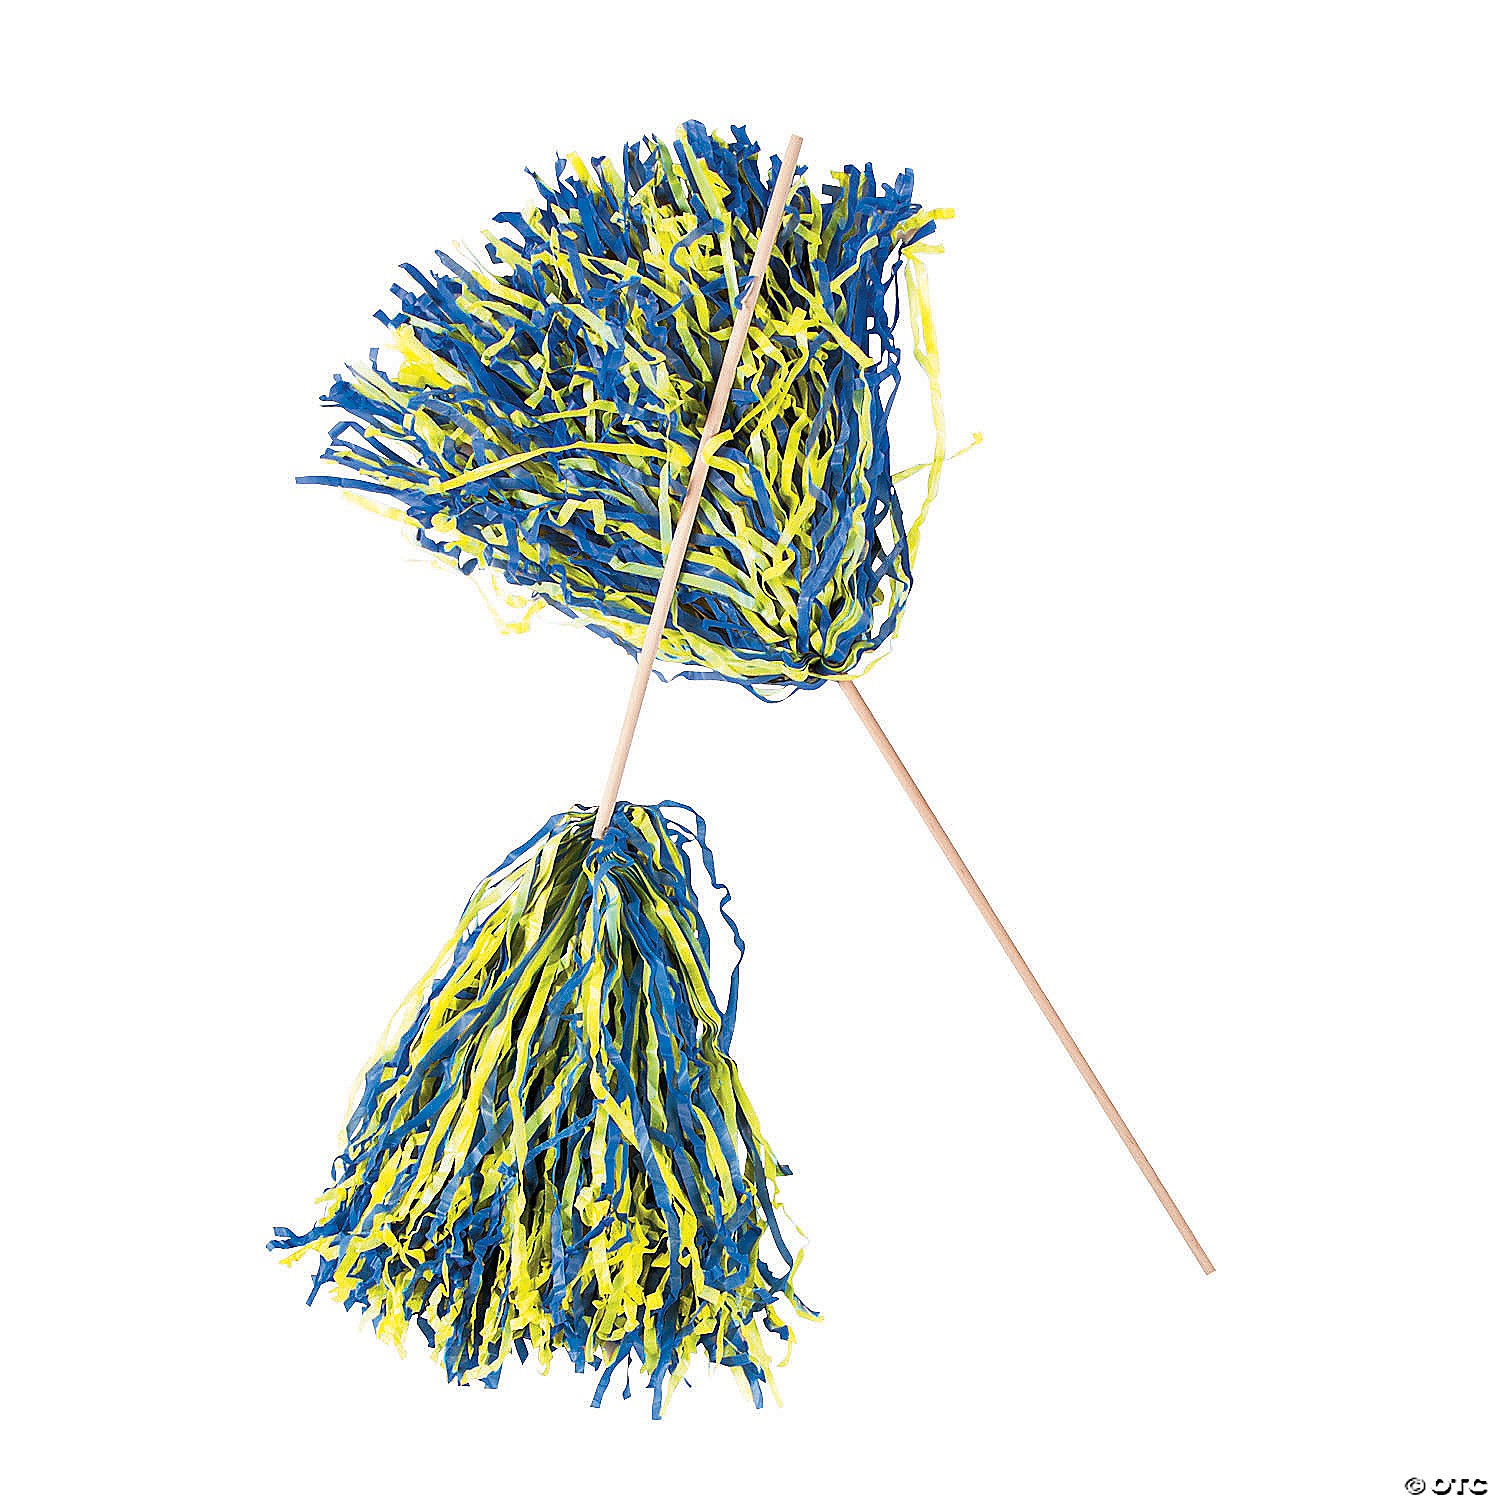  Cheerleading Pom Poms Blue and Gold,Cheerleading Flower  Balls,Foil Cheerleading Flower Balls,(Pack of 2) : Sports & Outdoors